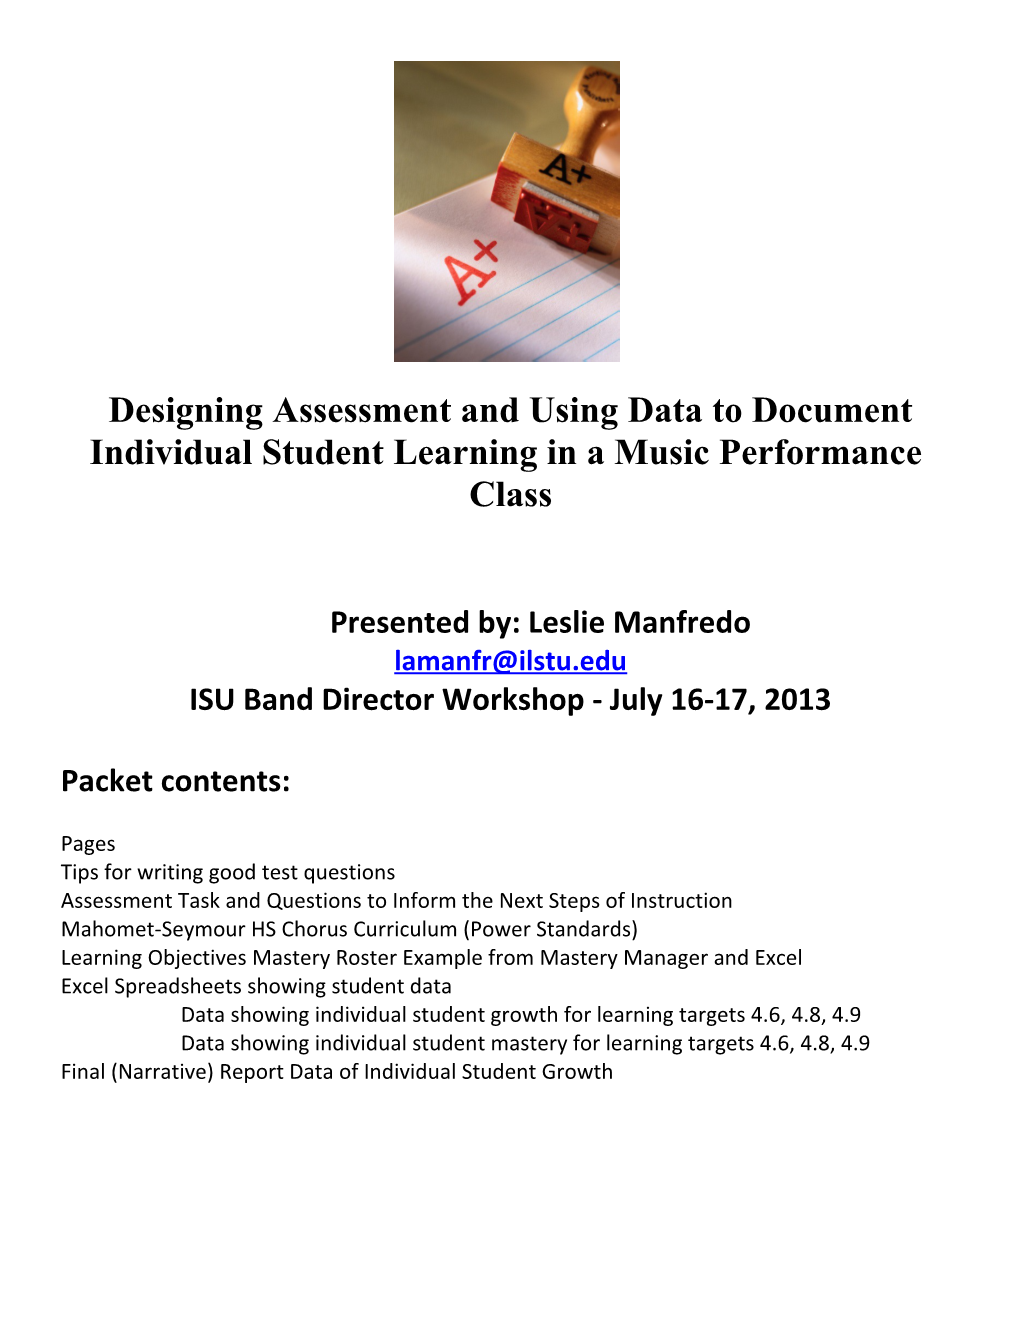 Designing Assessment and Using Data to Document Individual Student Learning in a Music